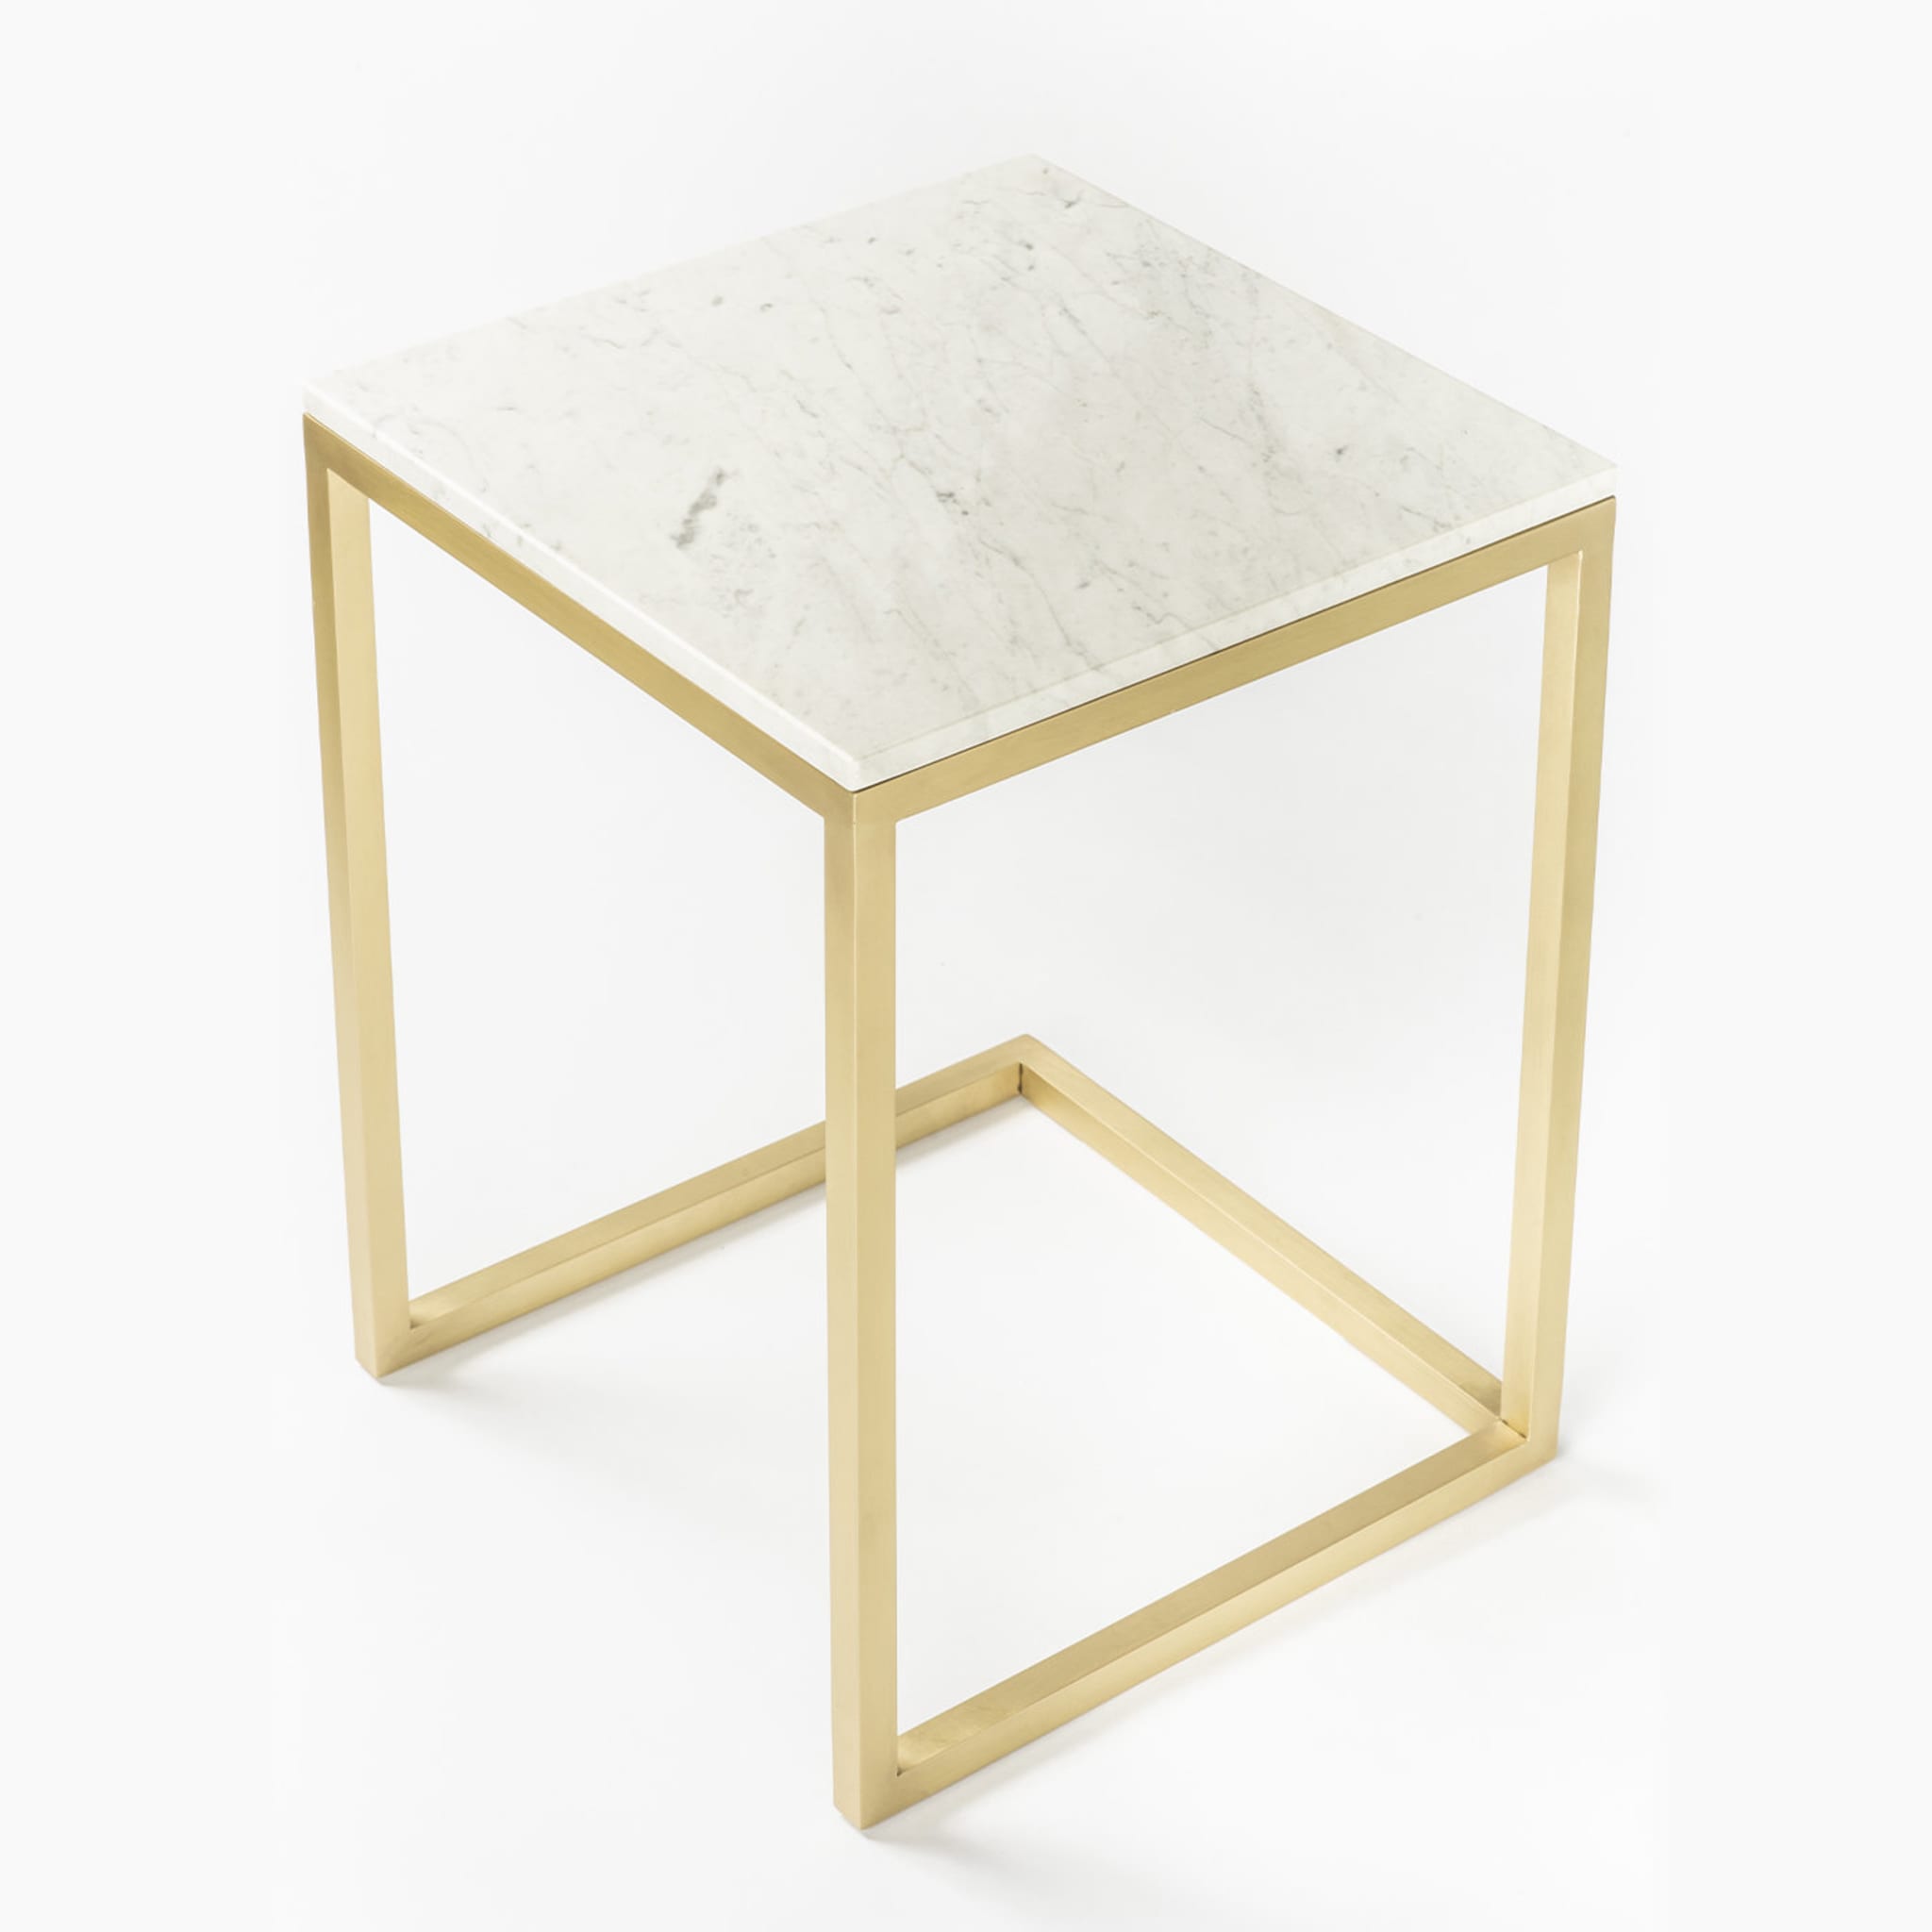 Esopo Brass and White Marble Side Table by Antonio Saporito - Alternative view 1